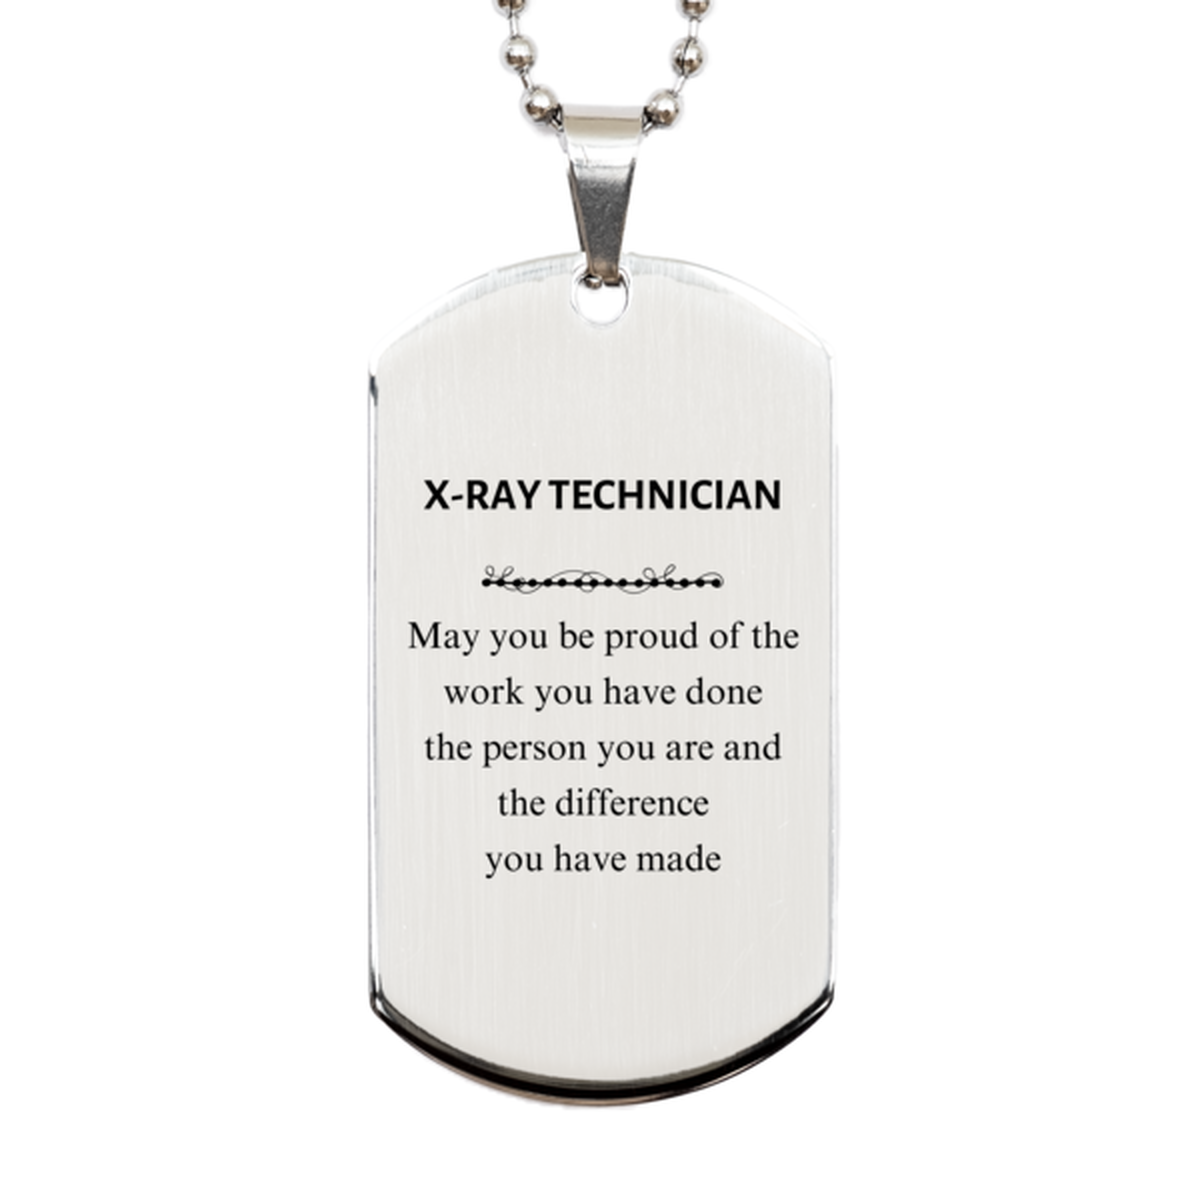 X-Ray Technician May you be proud of the work you have done, Retirement X-Ray Technician Silver Dog Tag for Colleague Appreciation Gifts Amazing for X-Ray Technician